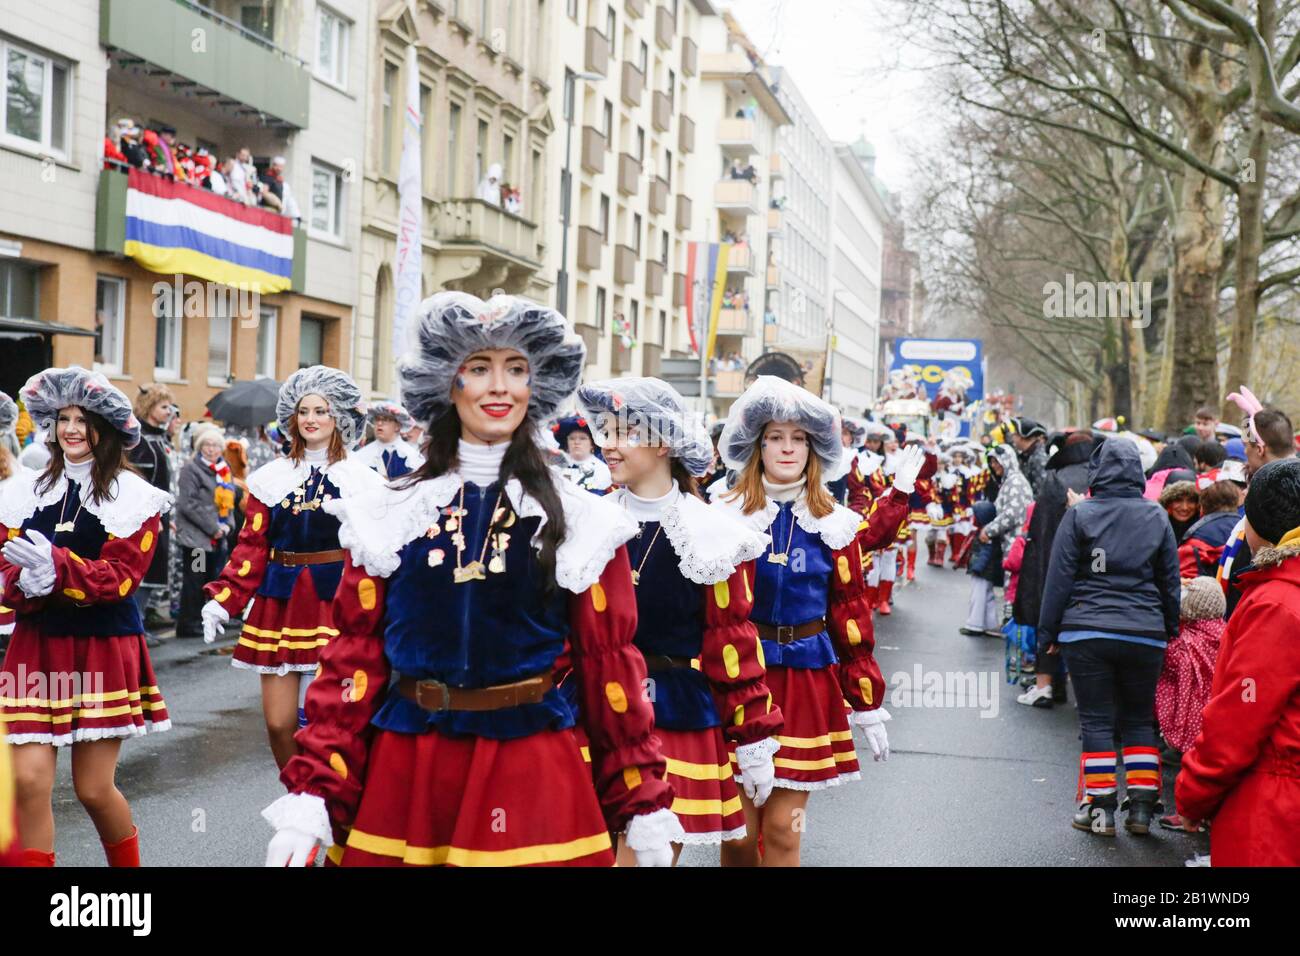 Mainz, Germany. 24th February 2020. Members of the Carneval Club Weisenau Burggrafengarde march in the the Mainz Rose Monday parade. Around half a million people lined the streets of Mainz for the traditional Rose Monday Carnival Parade. The 9 km long parade with over 9,000 participants is one of the three large Rose Monday Parades in Germany. Stock Photo